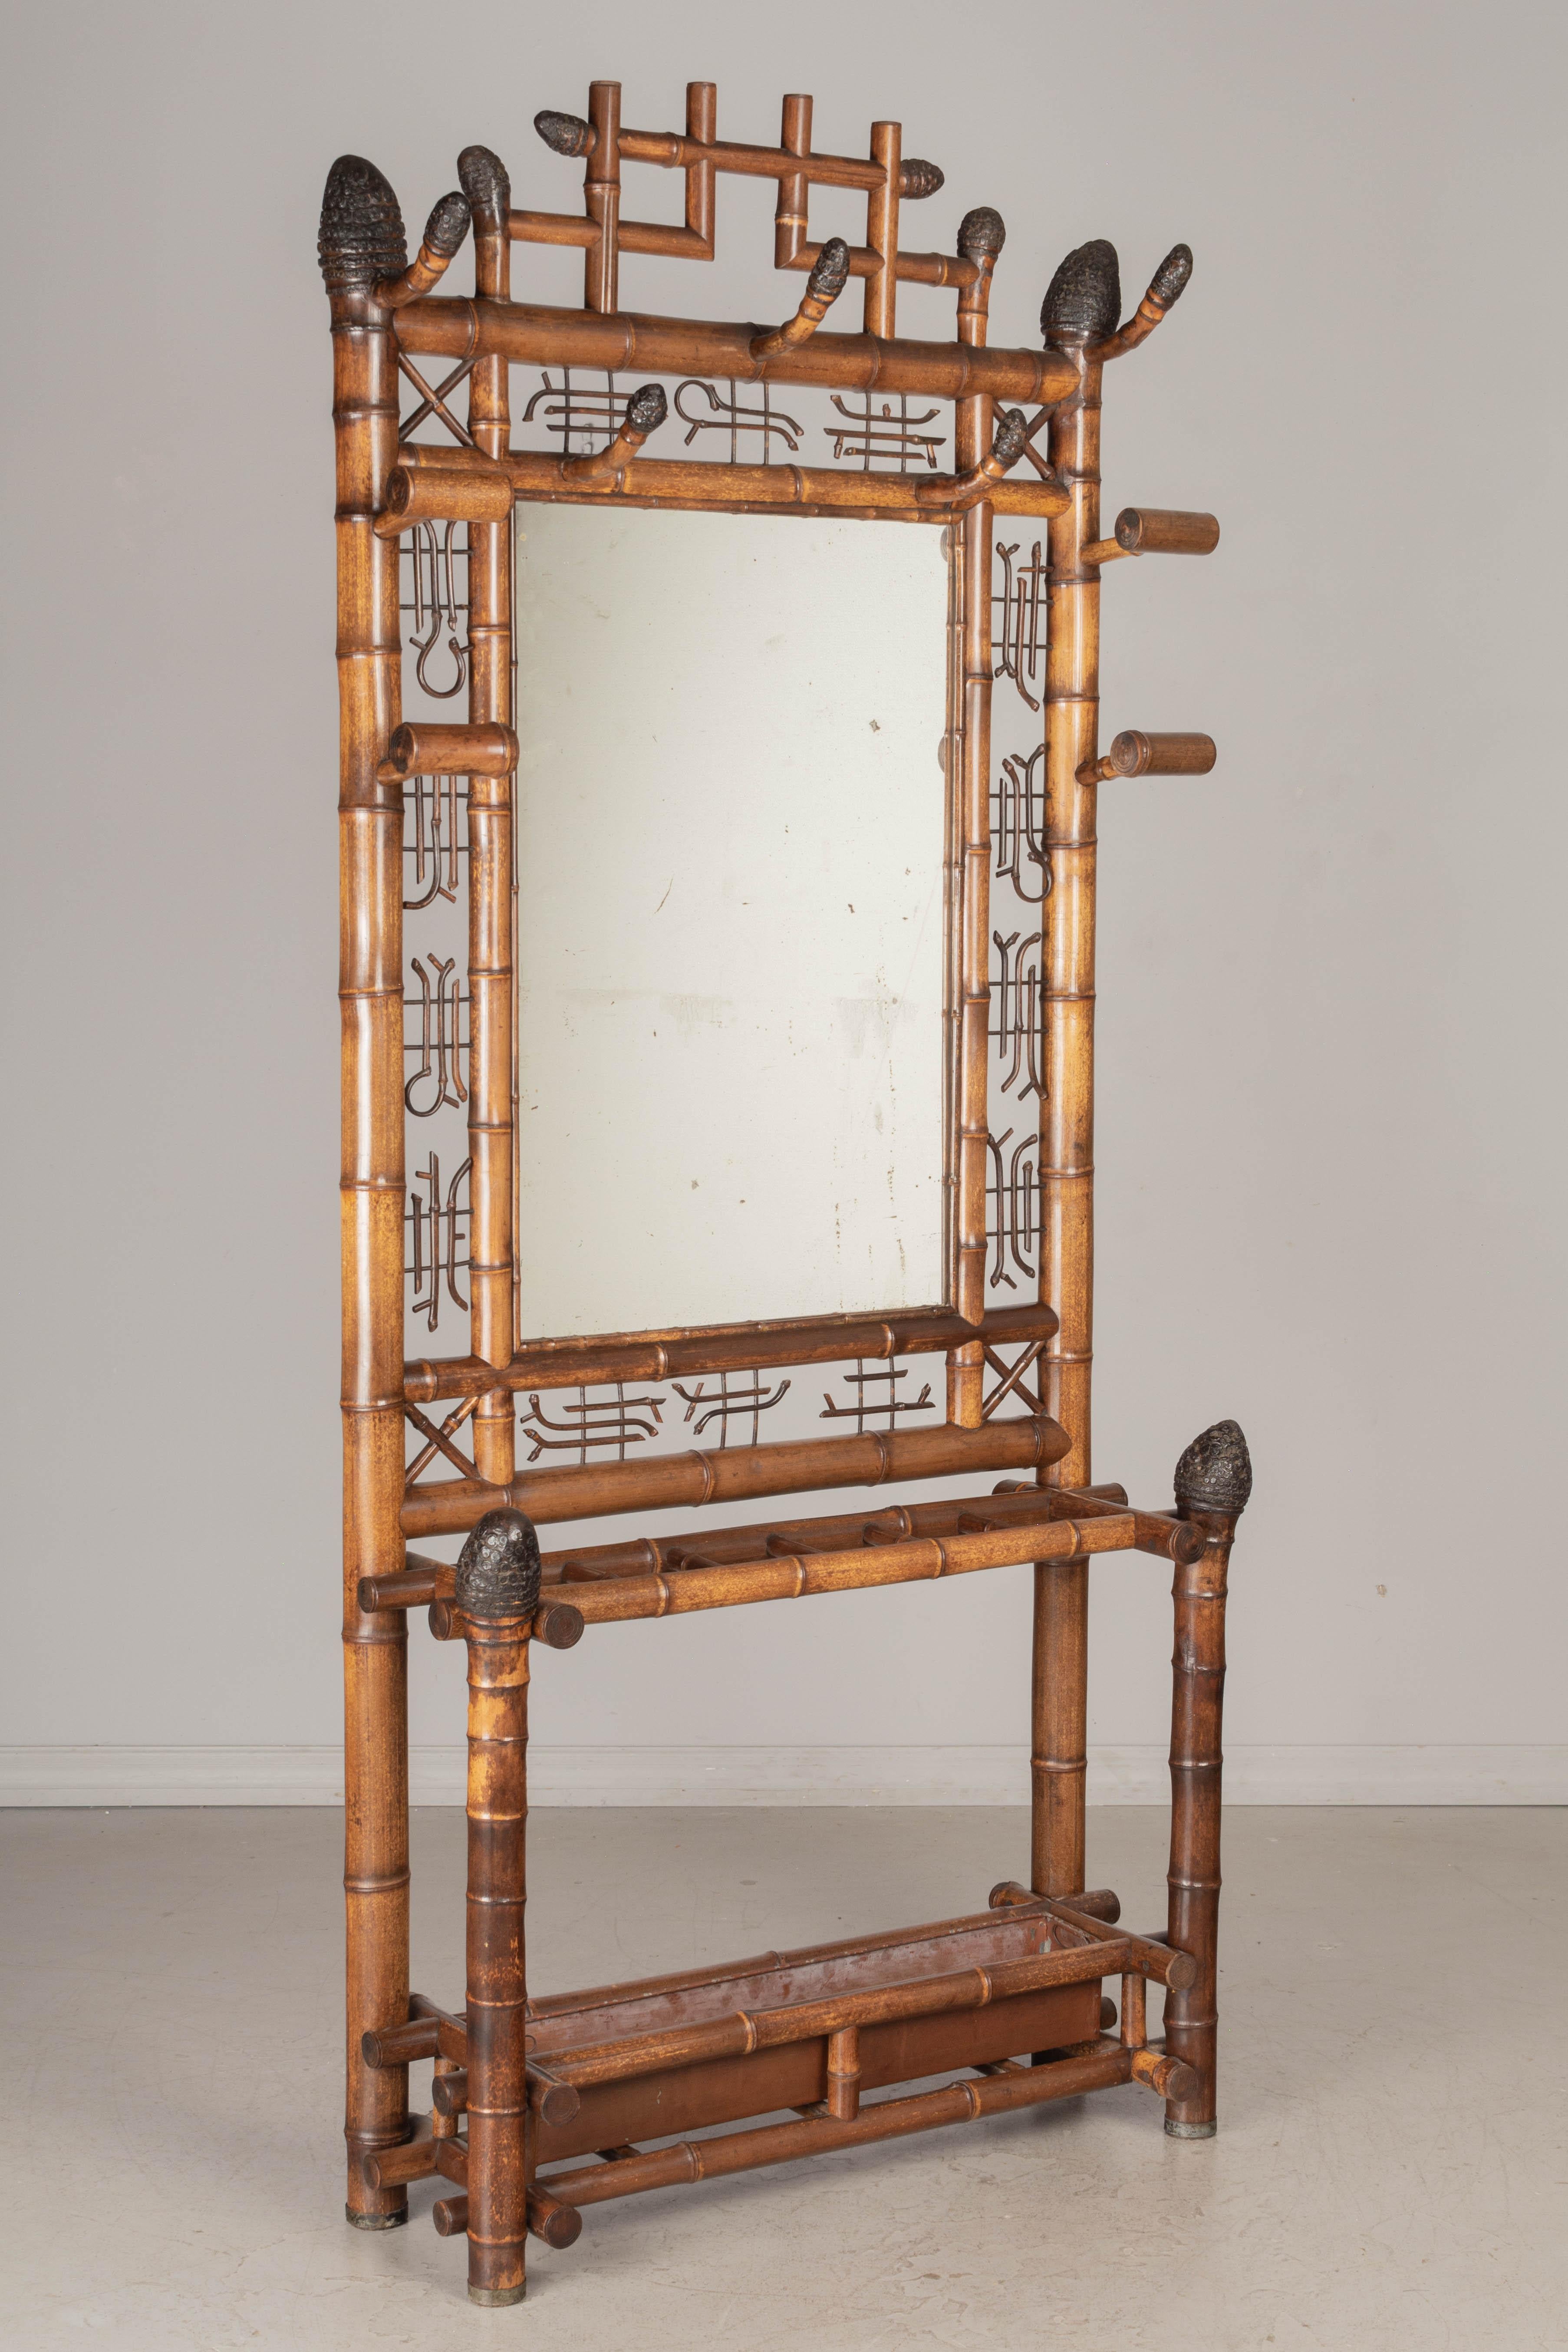 A 19th century French bamboo hall tree with a large mirror surrounded by a wide decorative border. Nine hooks for coats and hats, and an umbrella rack with removable tin drip tray. Large finials at the top and bottom made from burnt root end of